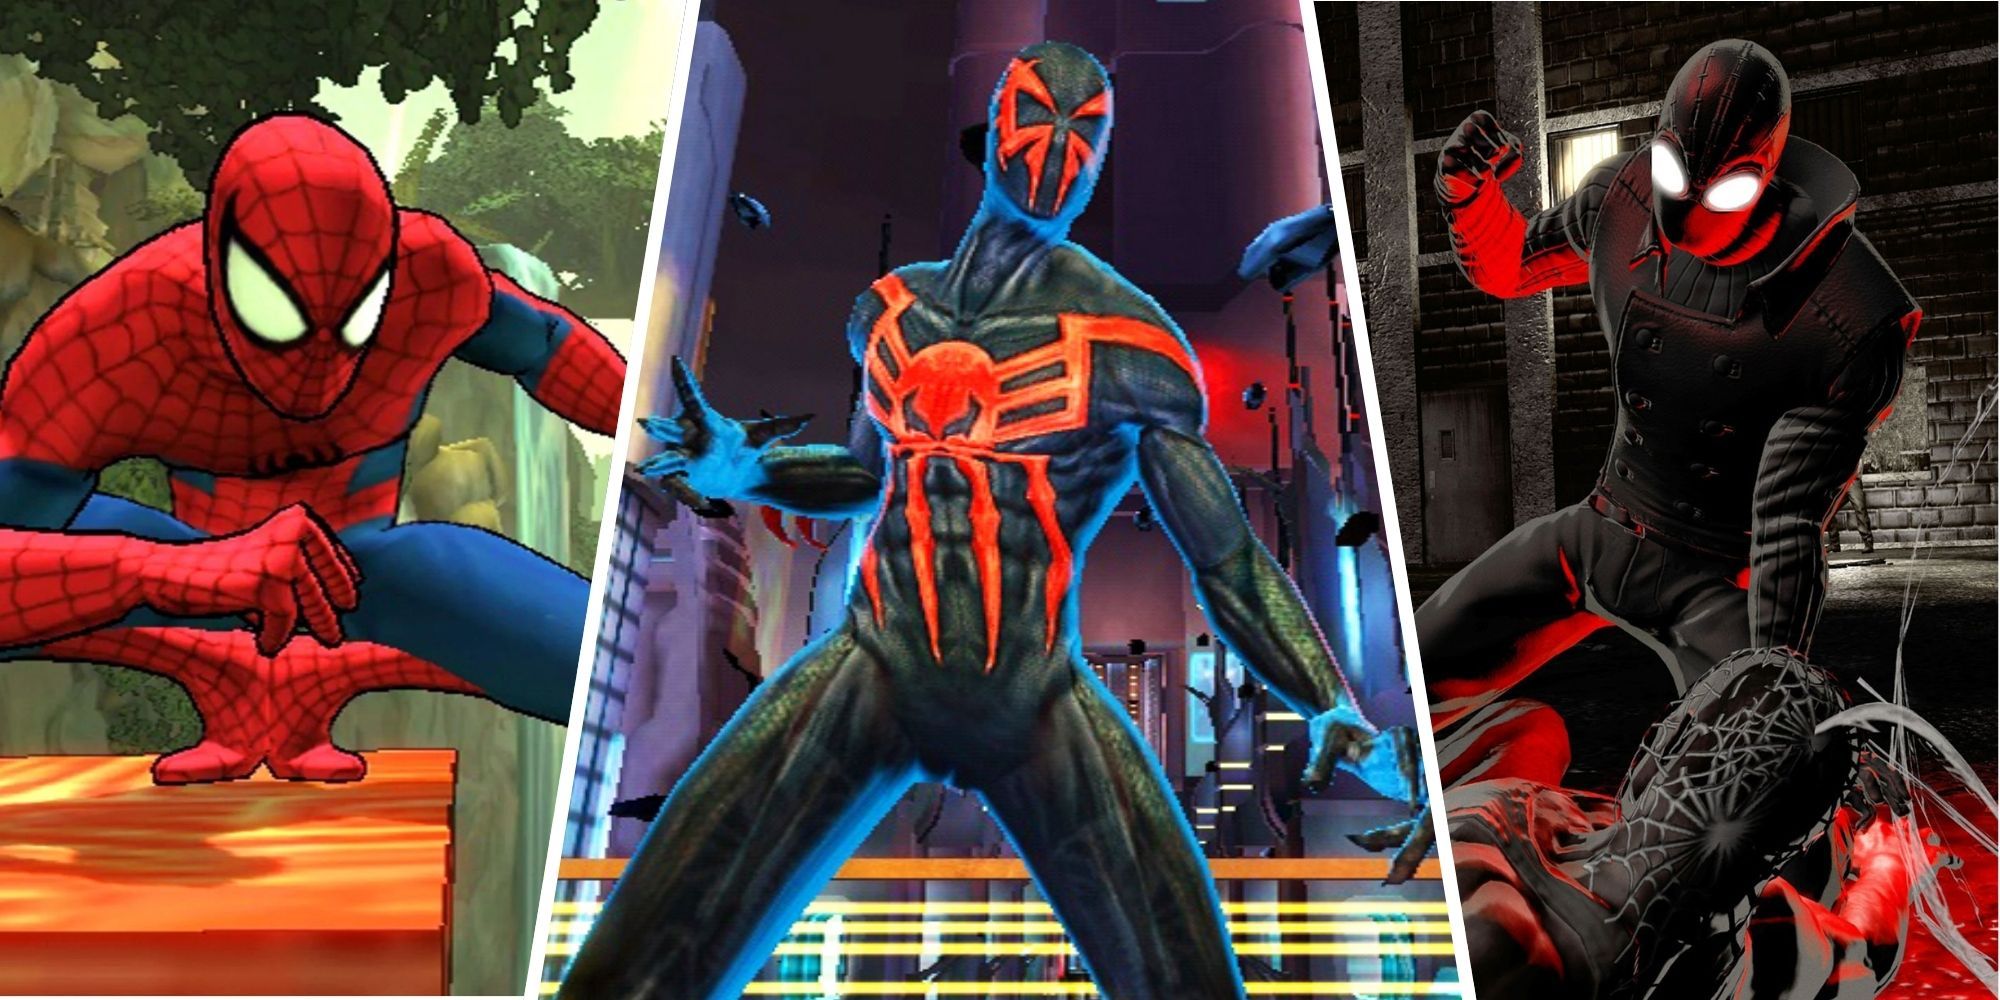 Spider-Man 2099 and Noir from Spider-Man Shattered Dimensions